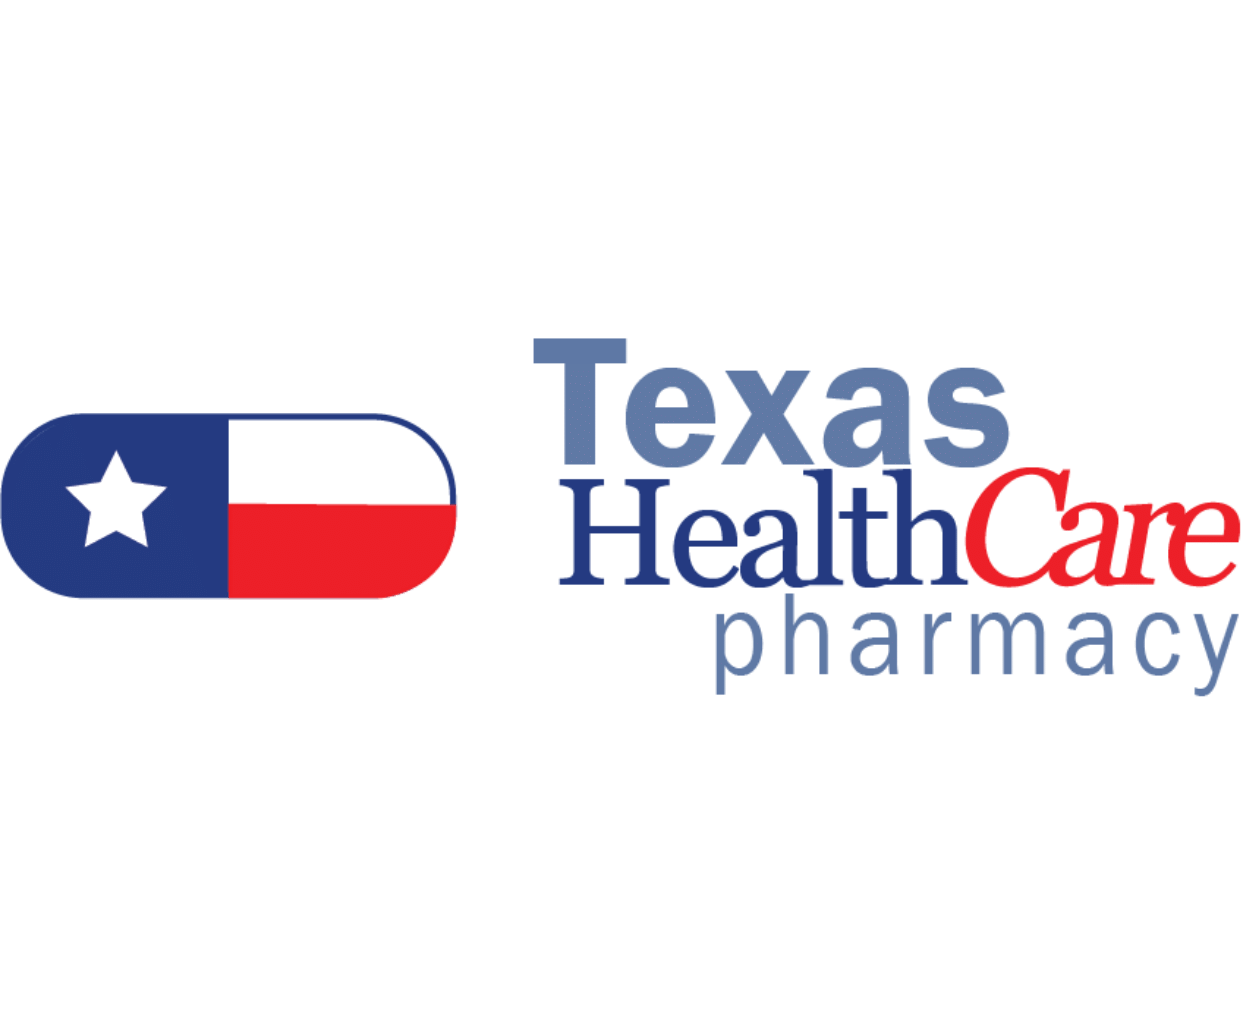 A logo featuring the words "texas healthcare pharmacy" next to a graphic that combines the shape of a pill and the design of the Texas state flag, symbolizing a pharmacy brand with a Texan